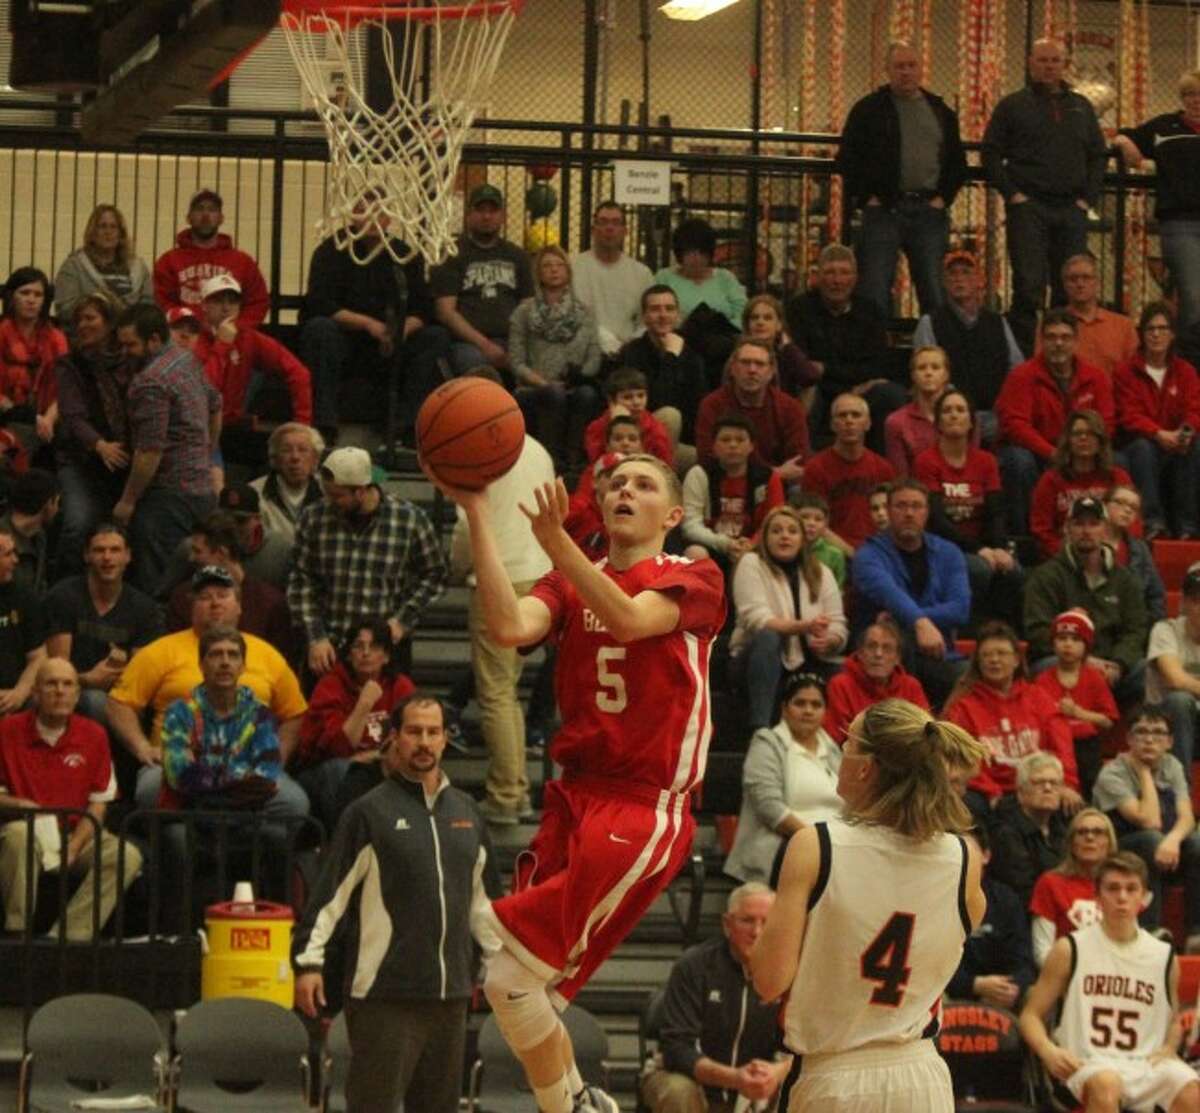 KNOWING HOW TO SCORE: Kyle Smith proved he could score at Benzie Central, whether it meant taking advantage of his deep jumper or navigating traffic to the basket as he does here in the district final against Ludington.